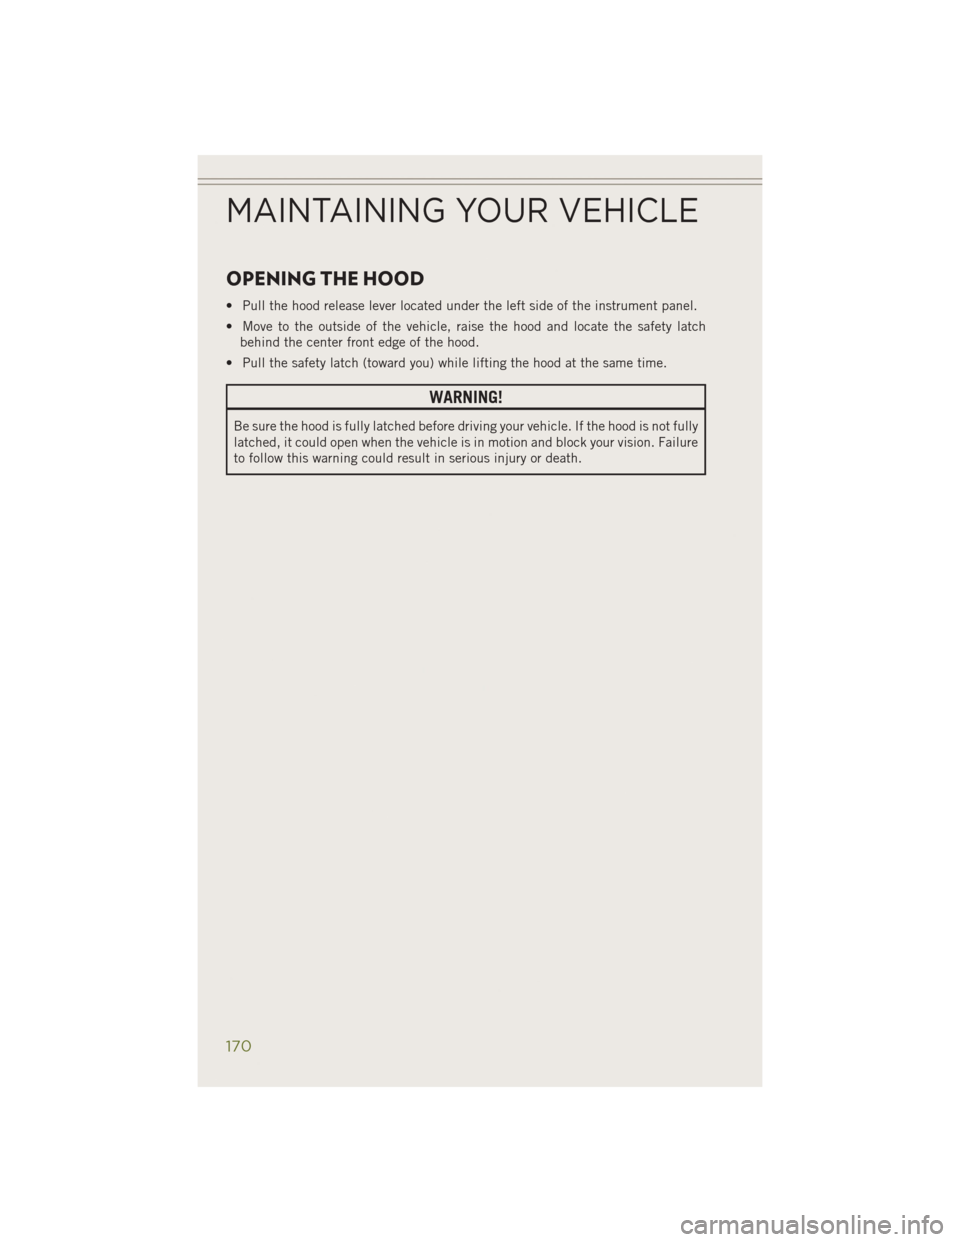 JEEP CHEROKEE 2014 KL / 5.G User Guide OPENING THE HOOD
• Pull the hood release lever located under the left side of the instrument panel.
• Move to the outside of the vehicle, raise the hood and locate the safety latchbehind the cente